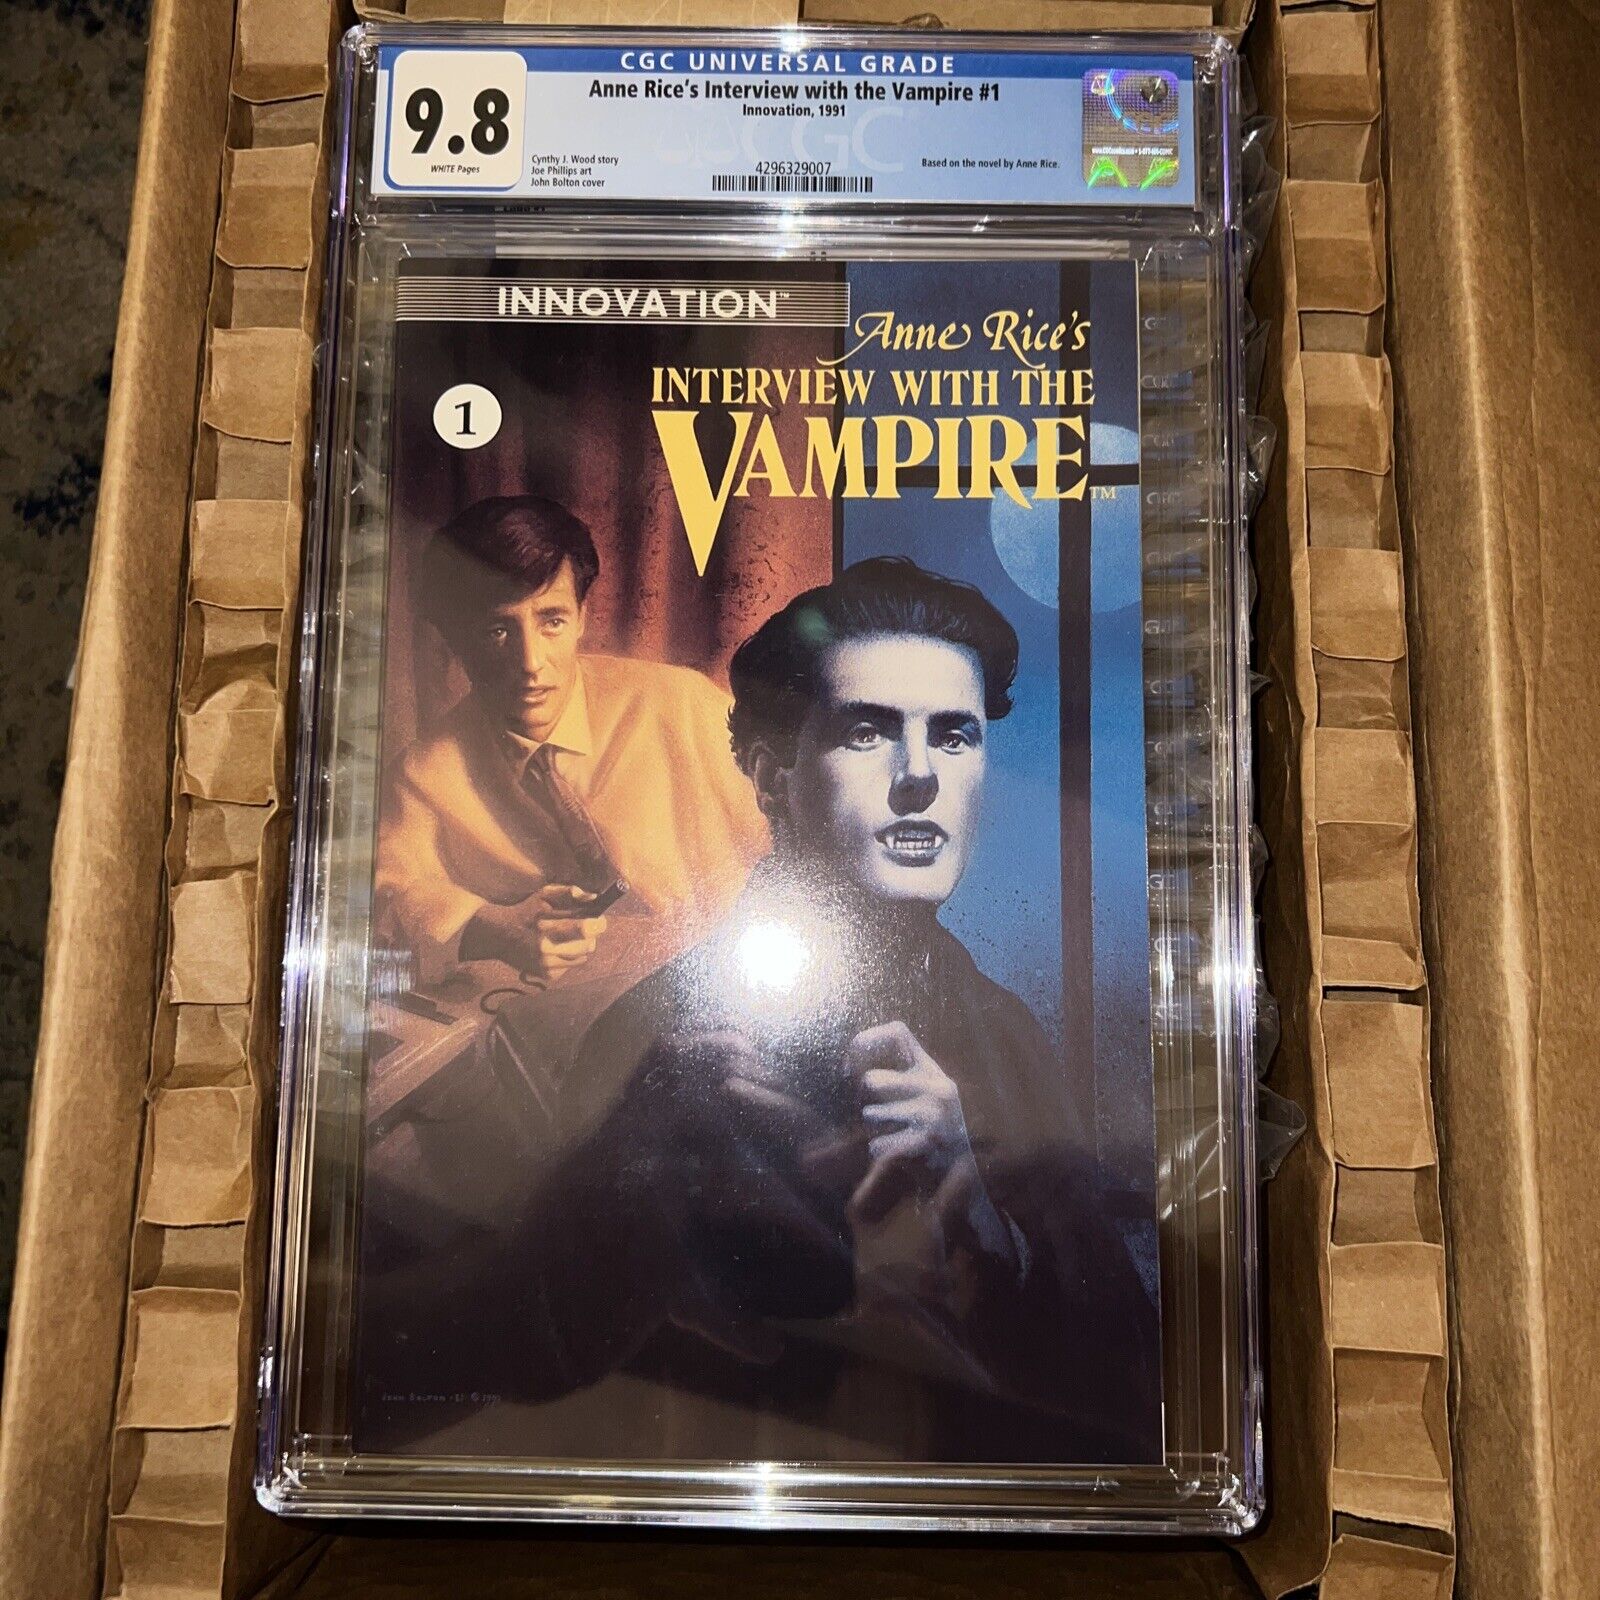 Anne Rice INTERVIEW WITH THE VAMPIRE #1 : CGC 9.8 NM/MT, 1991 Innovation 1ST APP